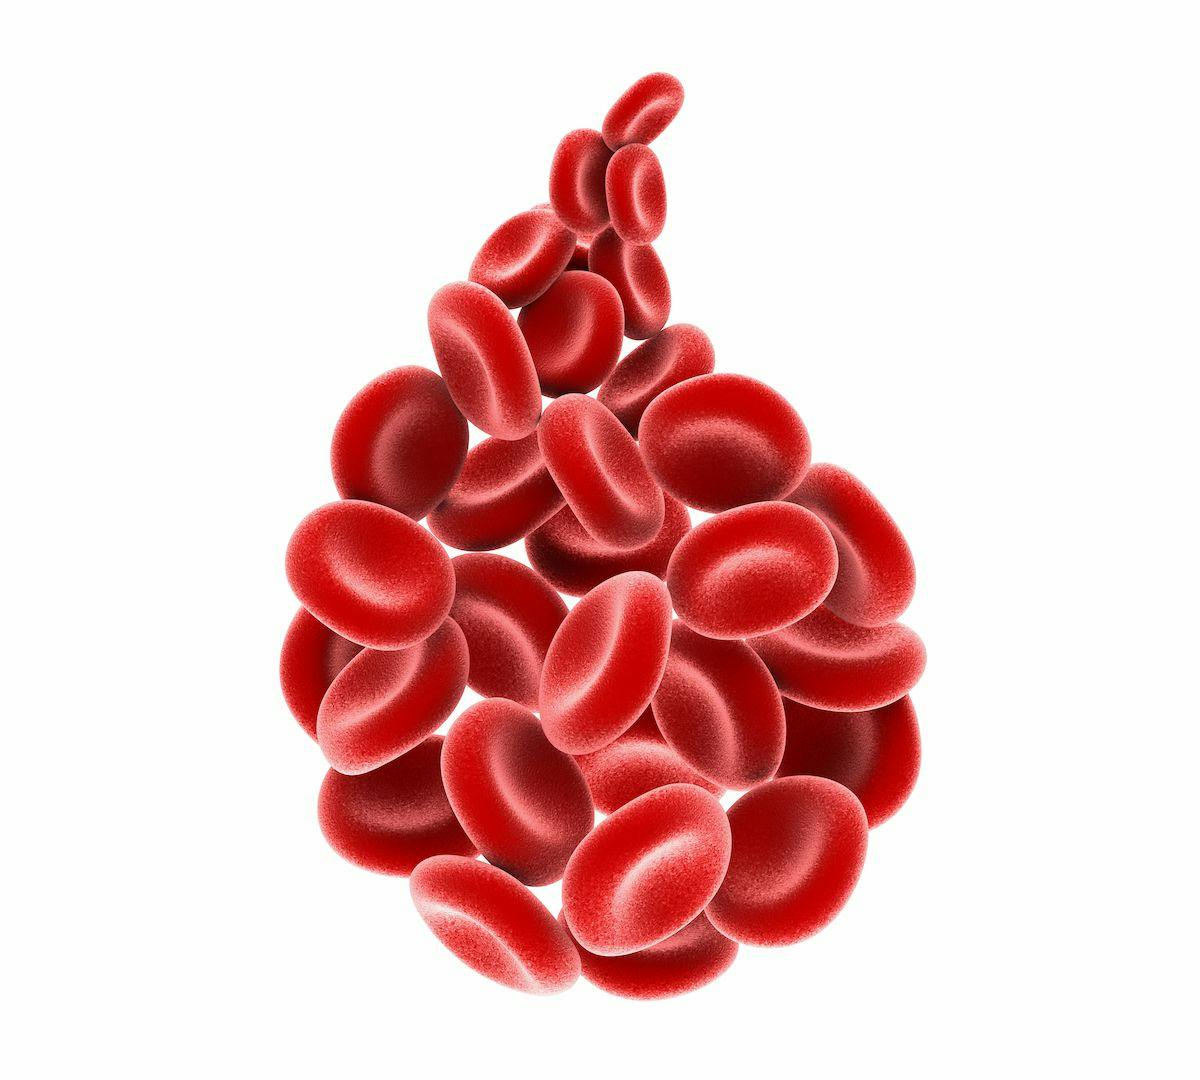 Patients with highly transfusion dependent, relapsed/refractory myelodysplastic syndrome appear to have long-lasting transfusion independence and increased hemoglobin following treatment with imetelstat.